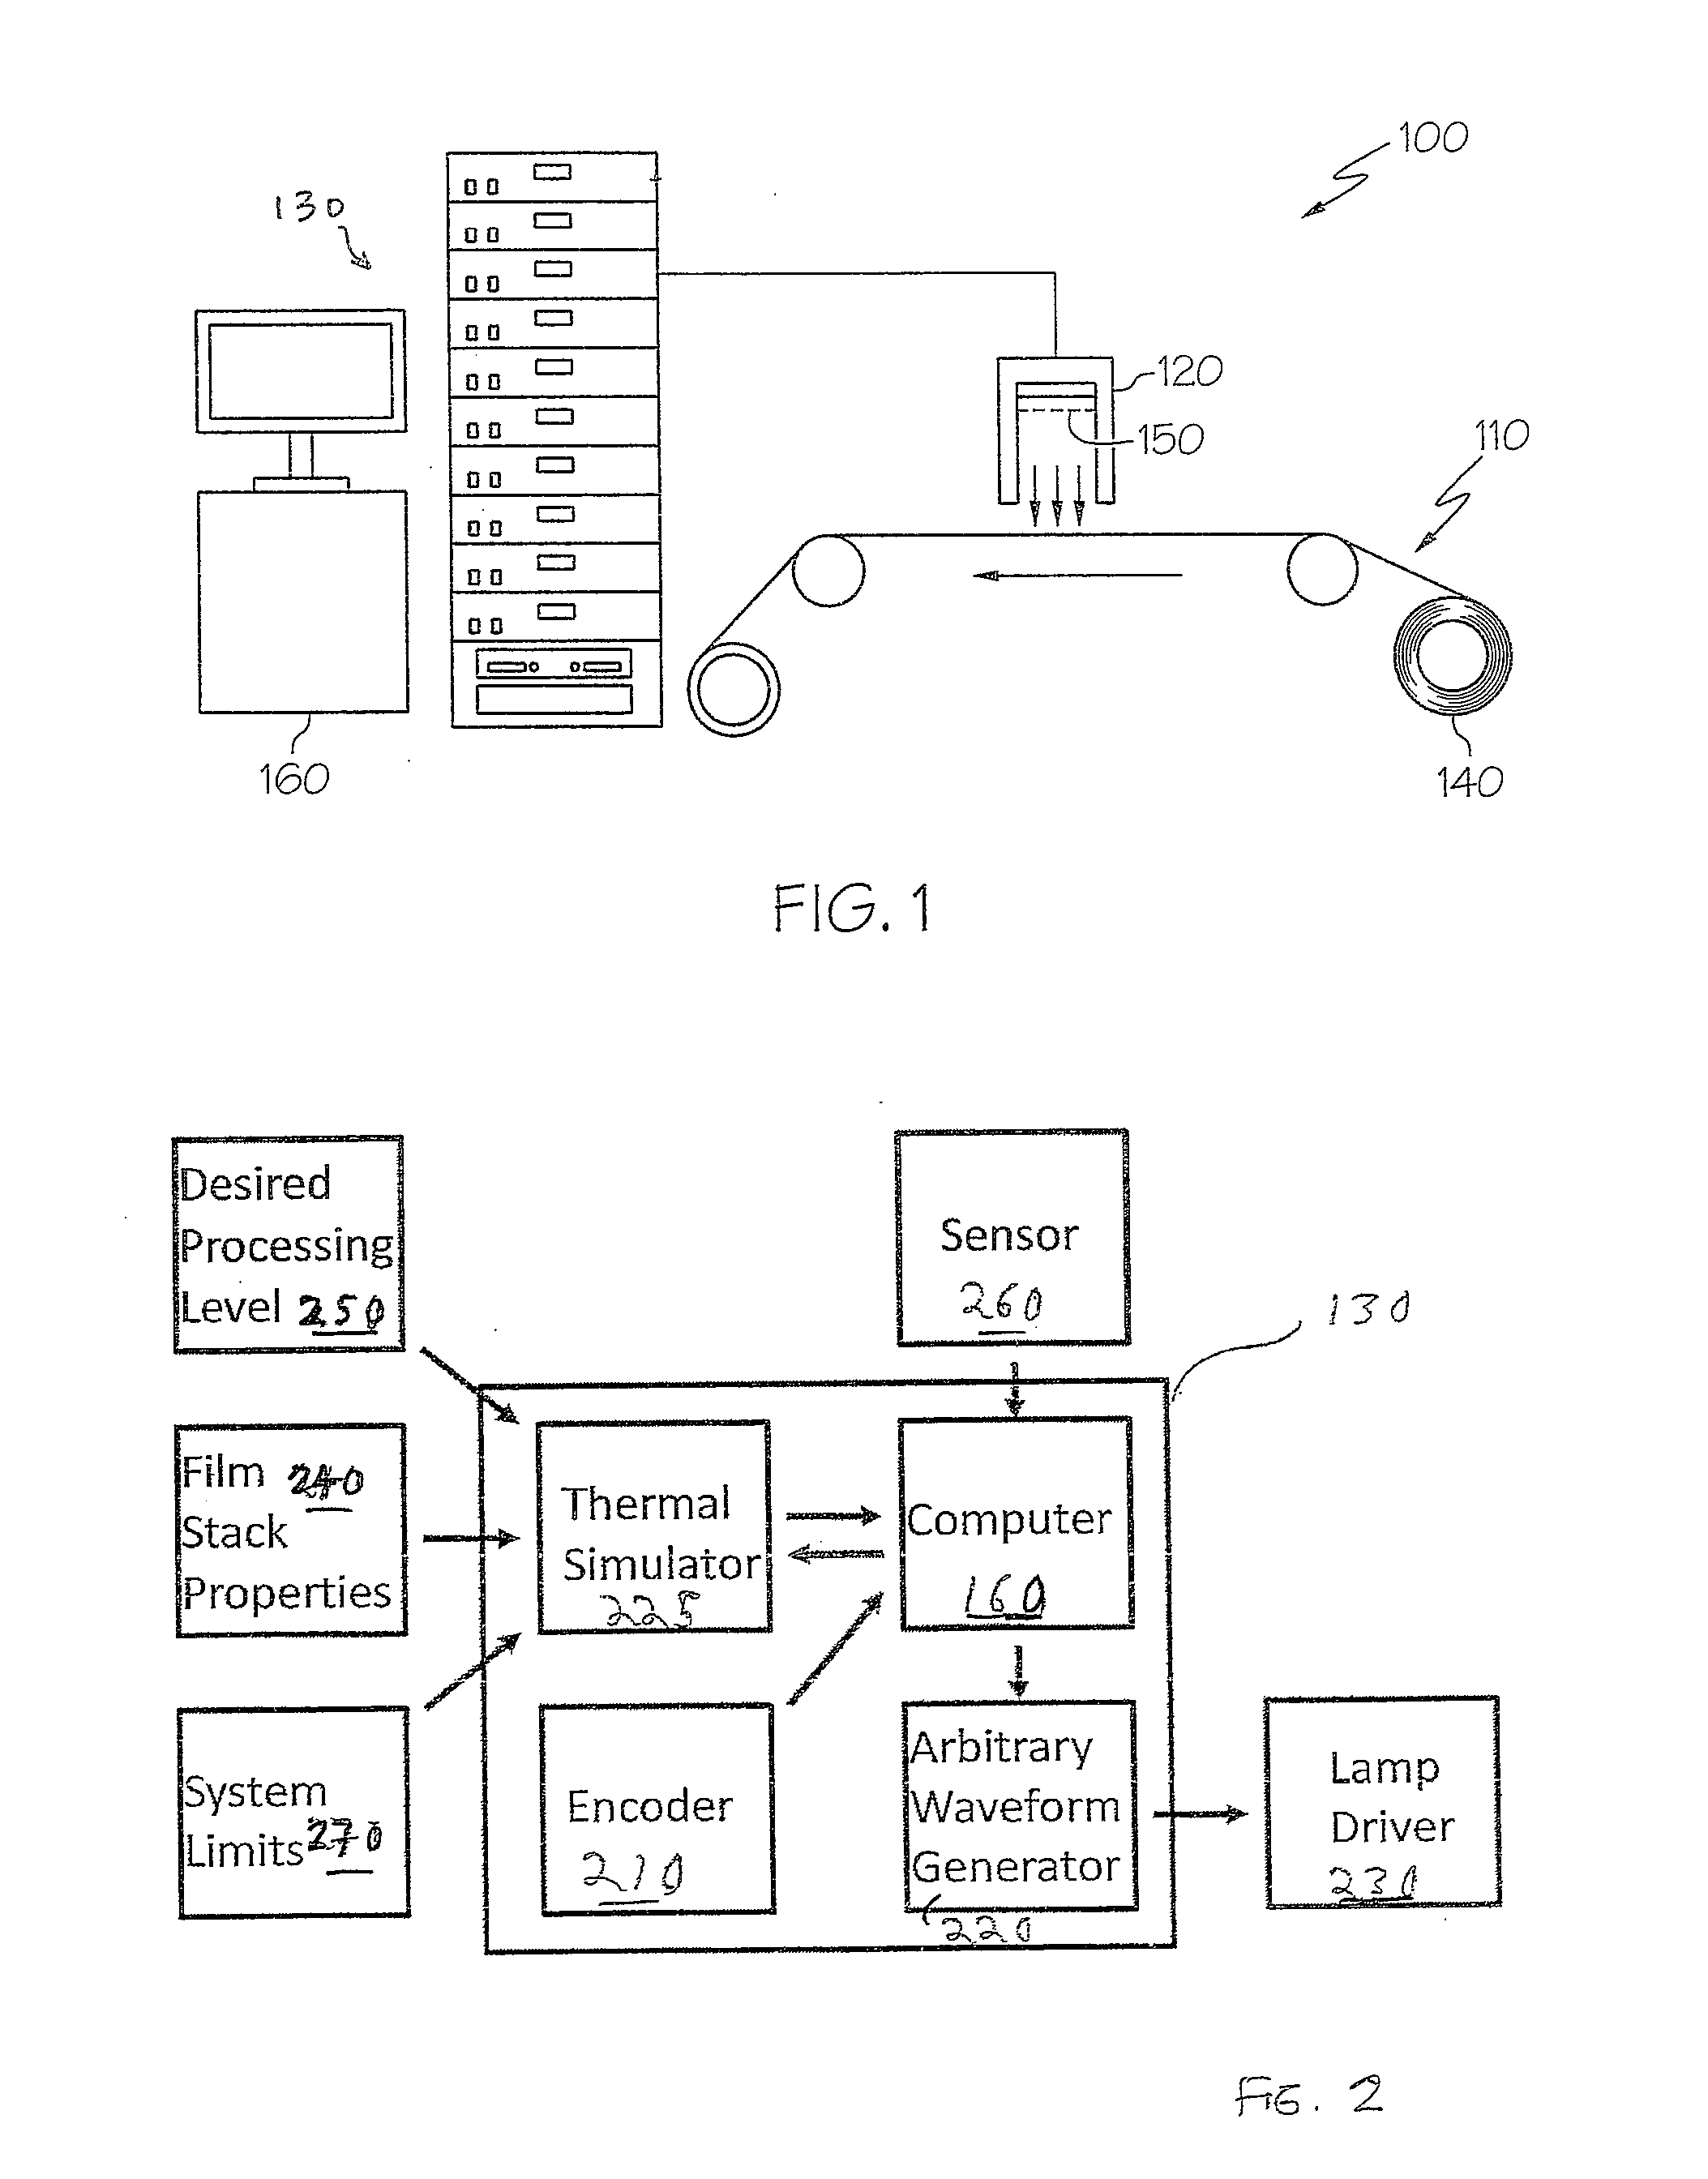 Apparatus for providing transient thermal profile processing on a moving substrate